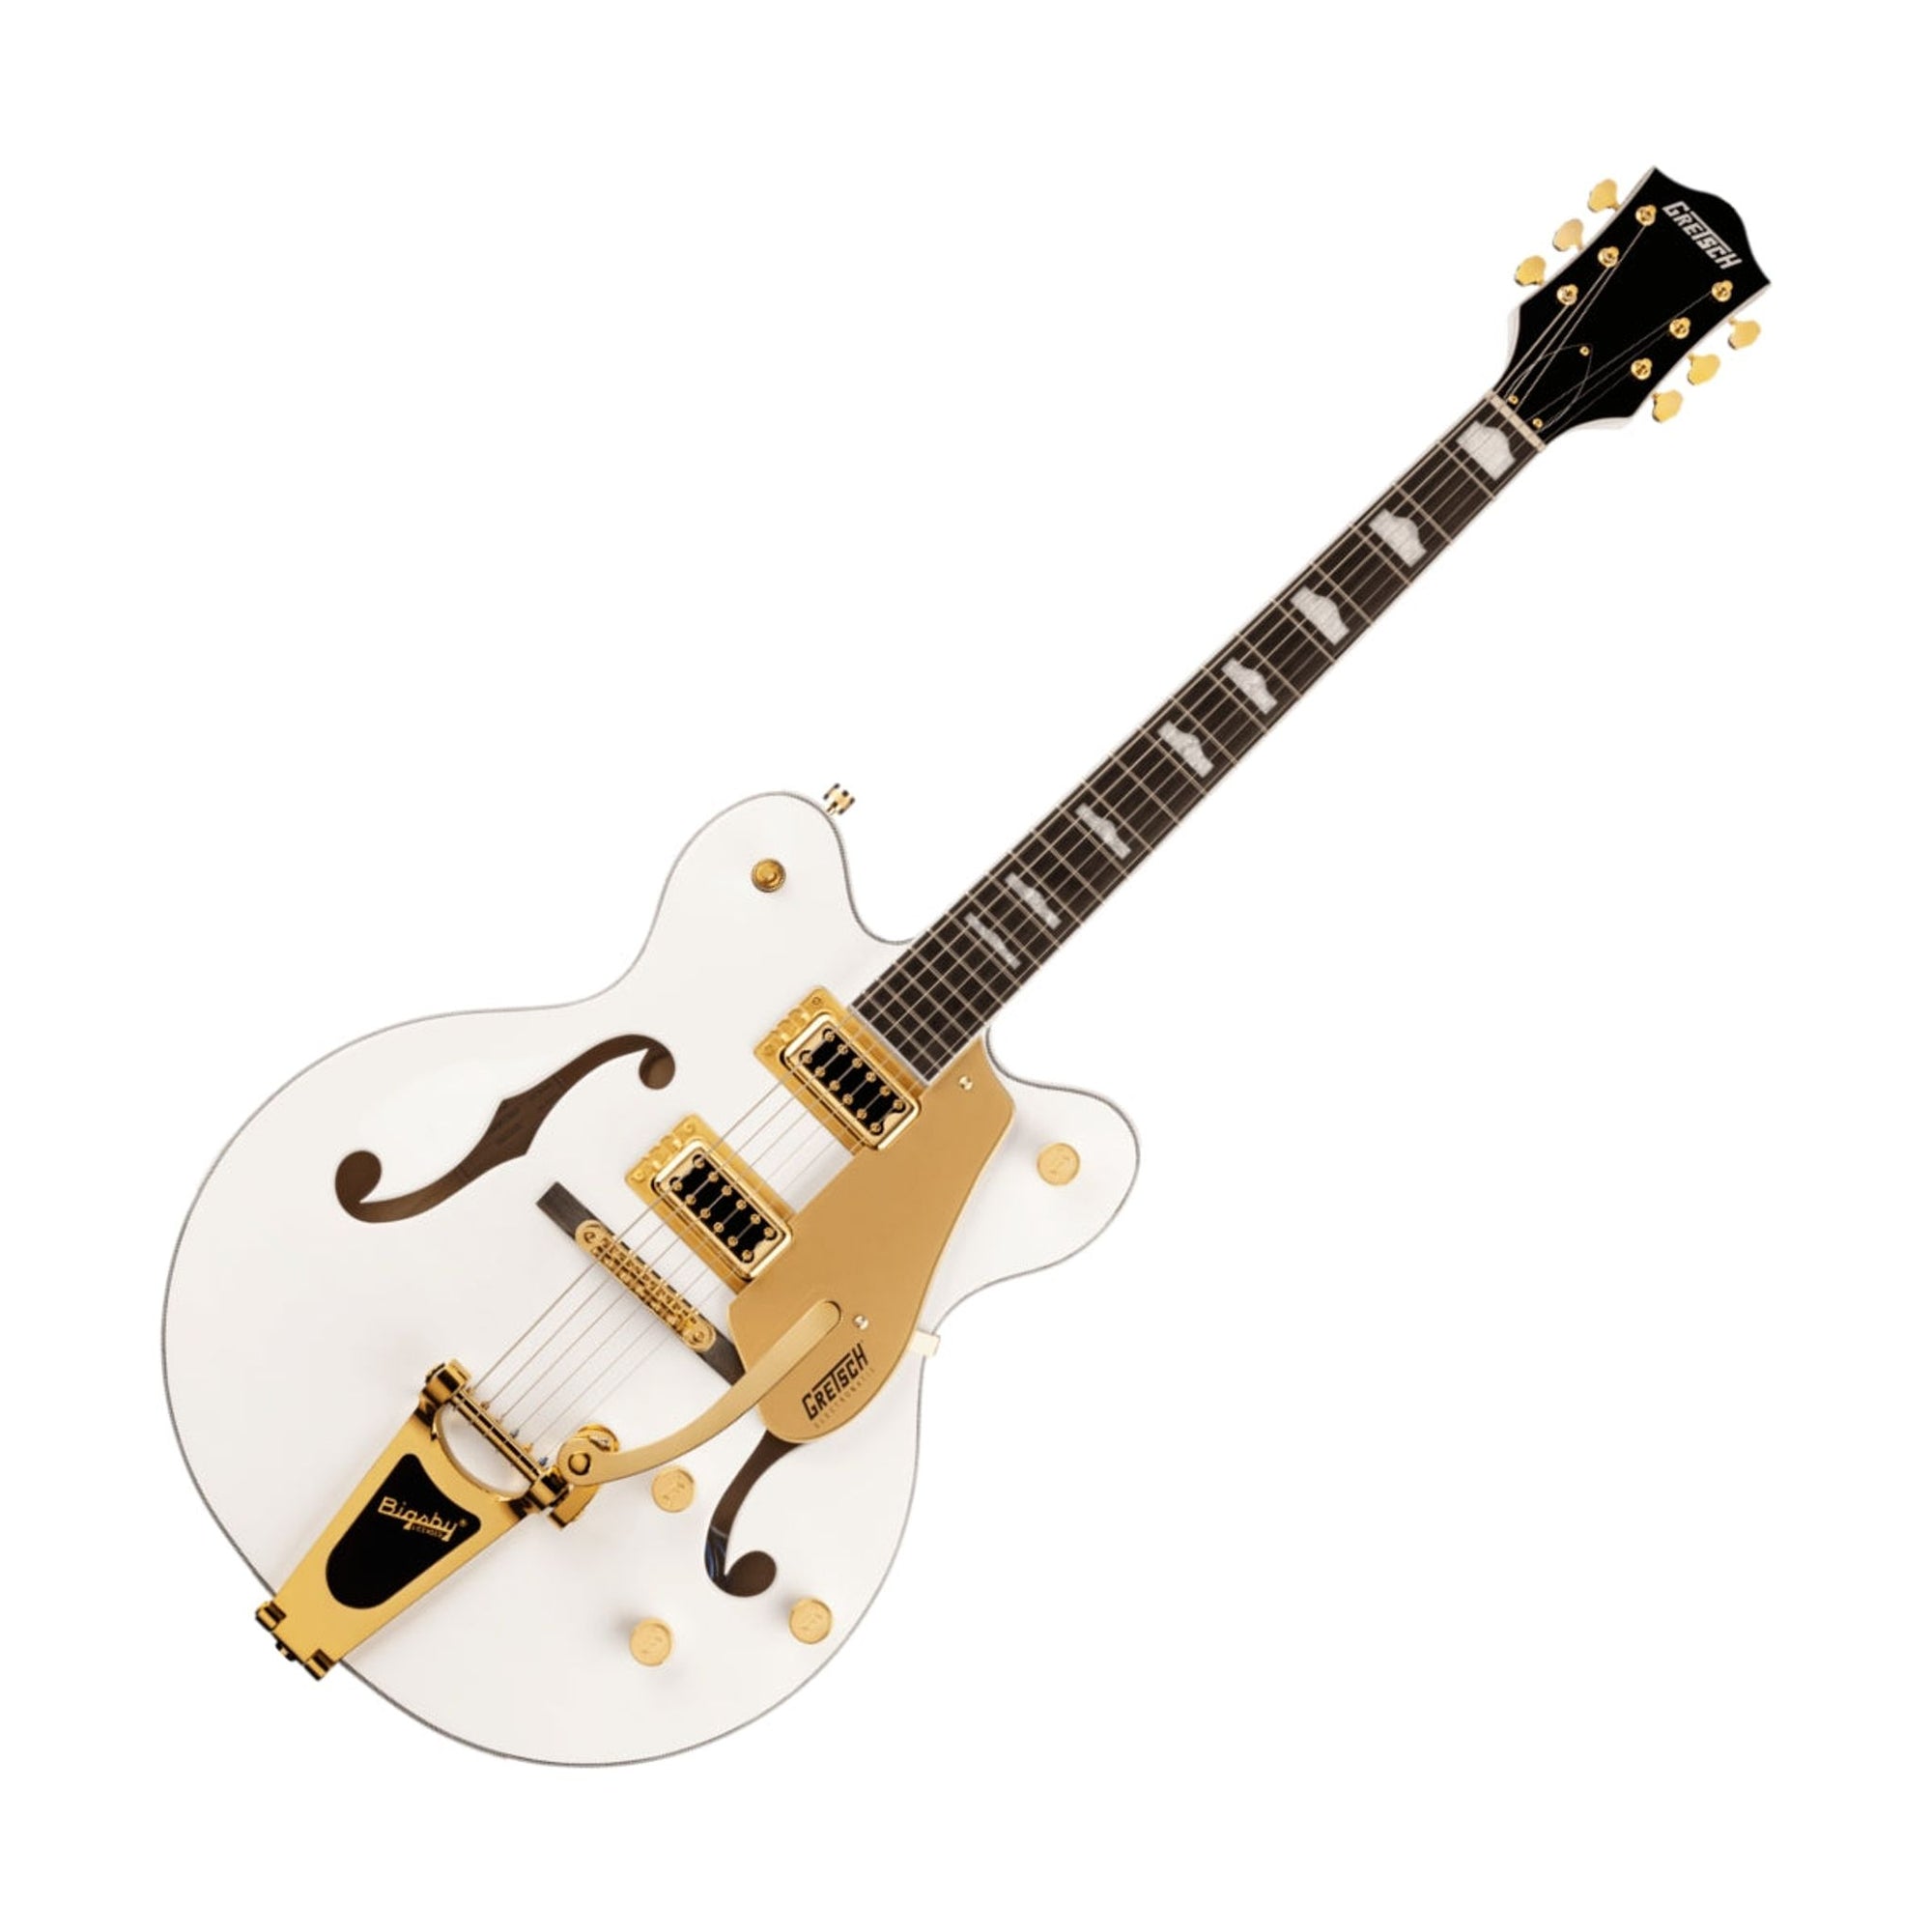 The Gretsch G5422TG Electromatic Classic Hollow Body Electric Guitar features a laminated maple body with vintage-inspired perimeters and refined arches, as well as all-new trestle block bracing to help reduce unwanted feedback.